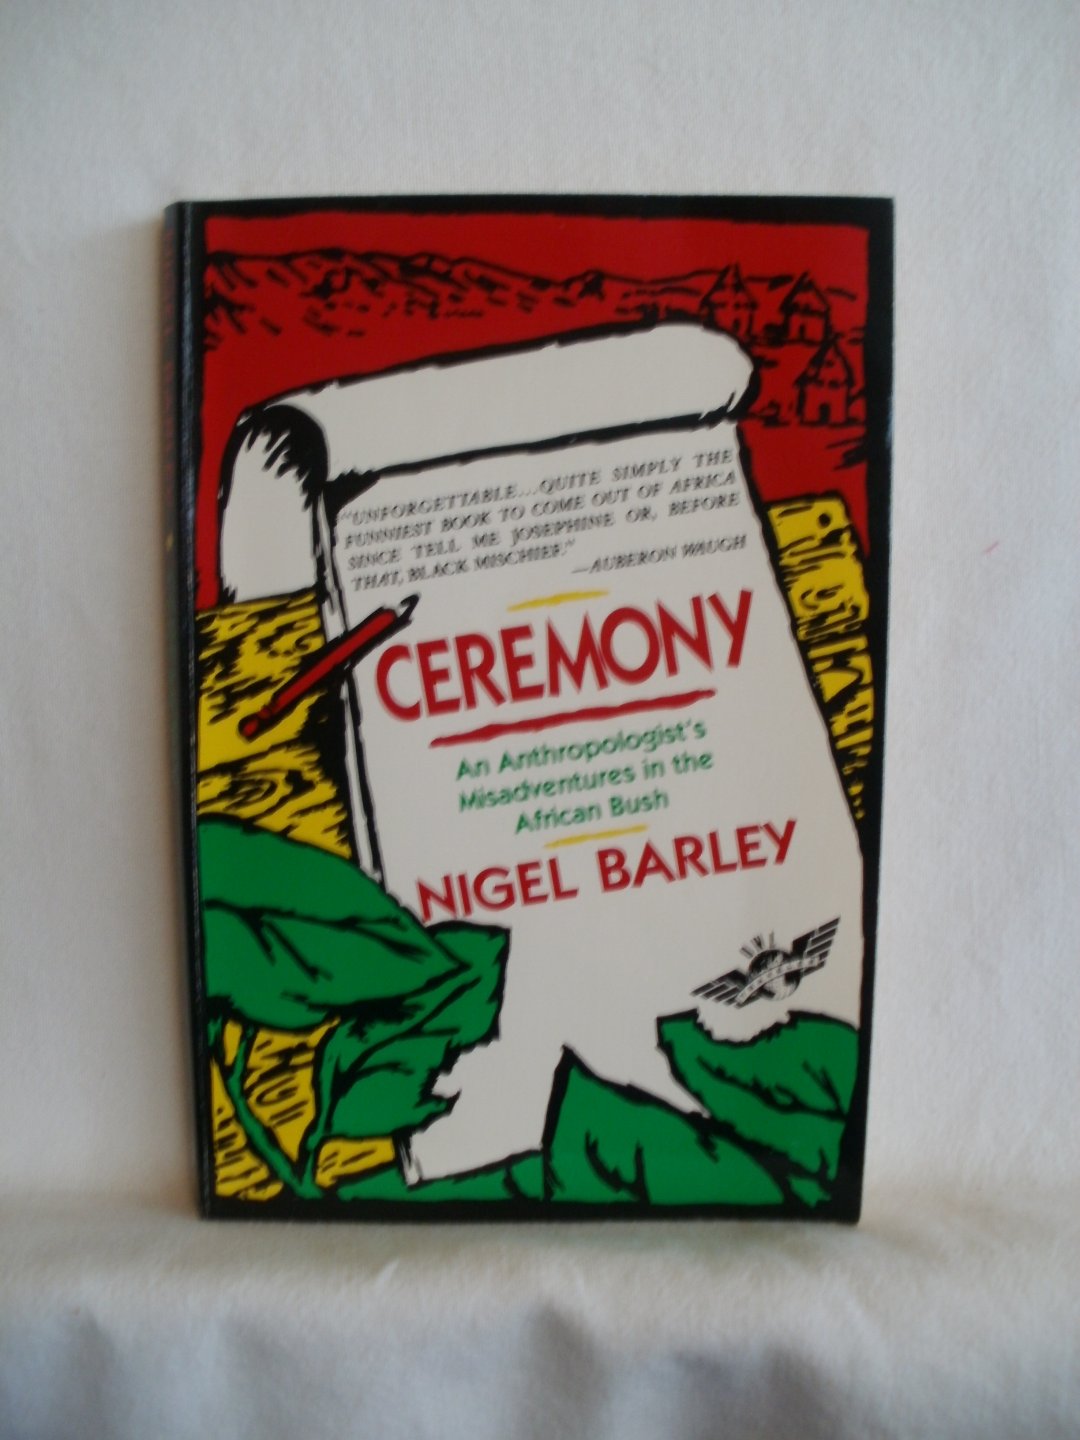 Barley, Nigel - Ceremony. An Anthropologist's Misadventures in the African Bush.